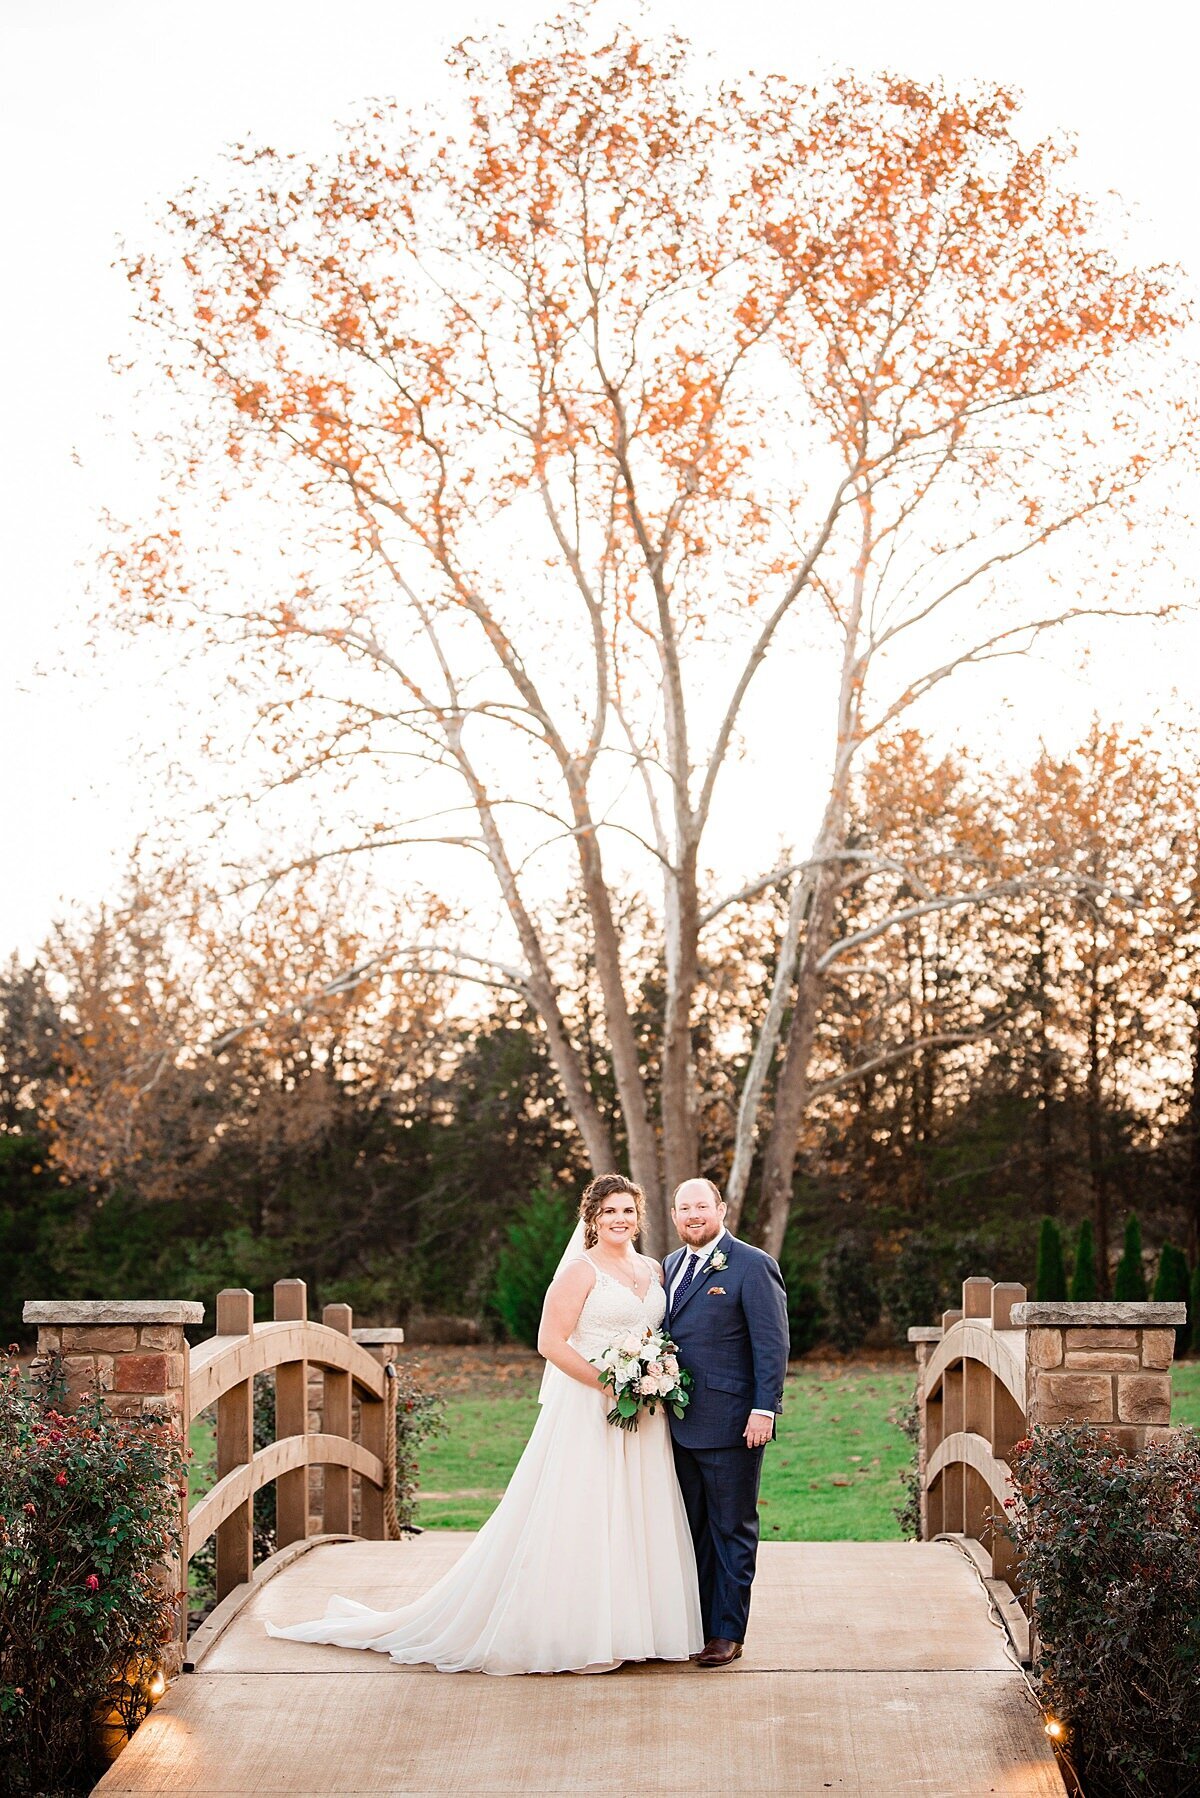 The bride, wearing a long, a-line, lace wedding dress and veil holding a white, ivory and blush bouquet standing beside the groom dressed in a navy blue suit on a bridge passing over a creek at Sycamore Farms